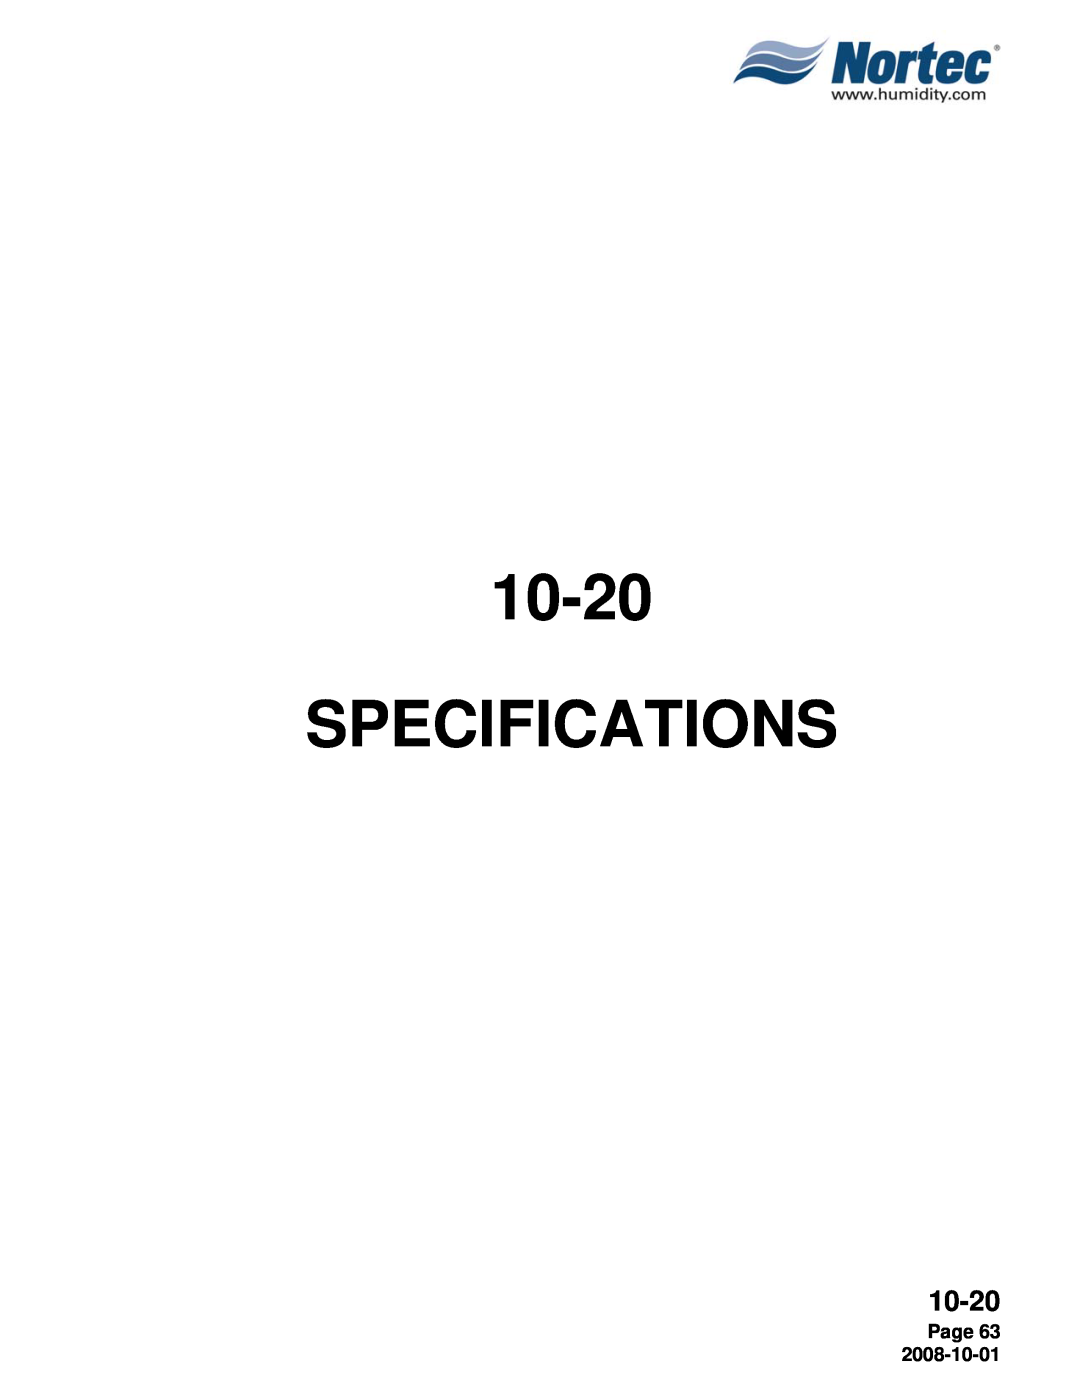 Nortec NHTC, NHPC manual Specifications, 10-20, Page 63 